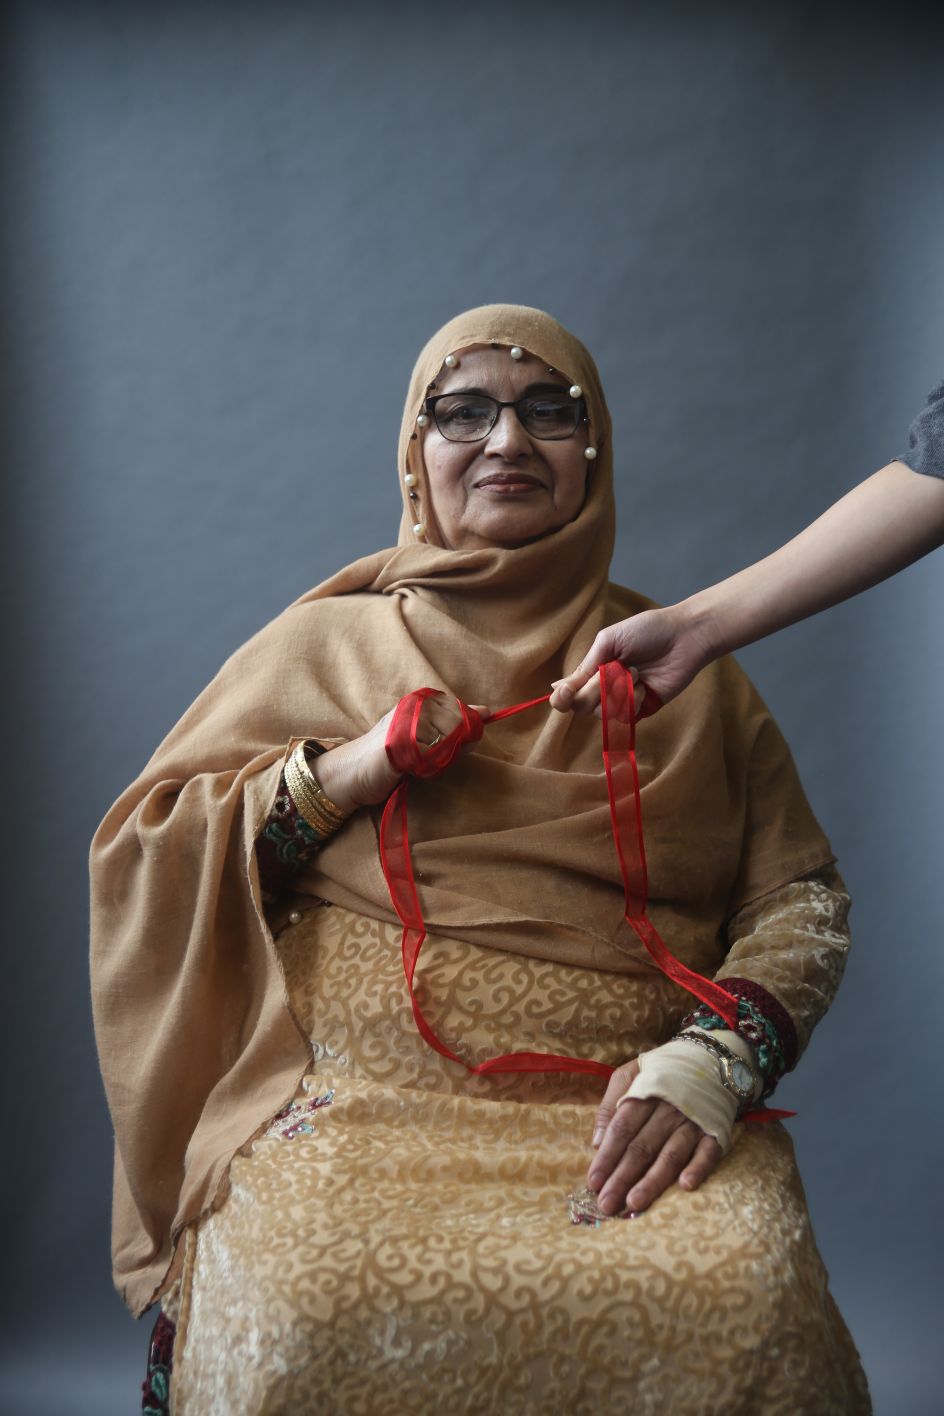 Zahida Qateel Glasgow, 2018 Scarlett Crawford, 2018.  “Zahida wanted to communicate her pride in family and community. She asked her daughter to hold the ribbon with her to represent this.” © UK Parliament